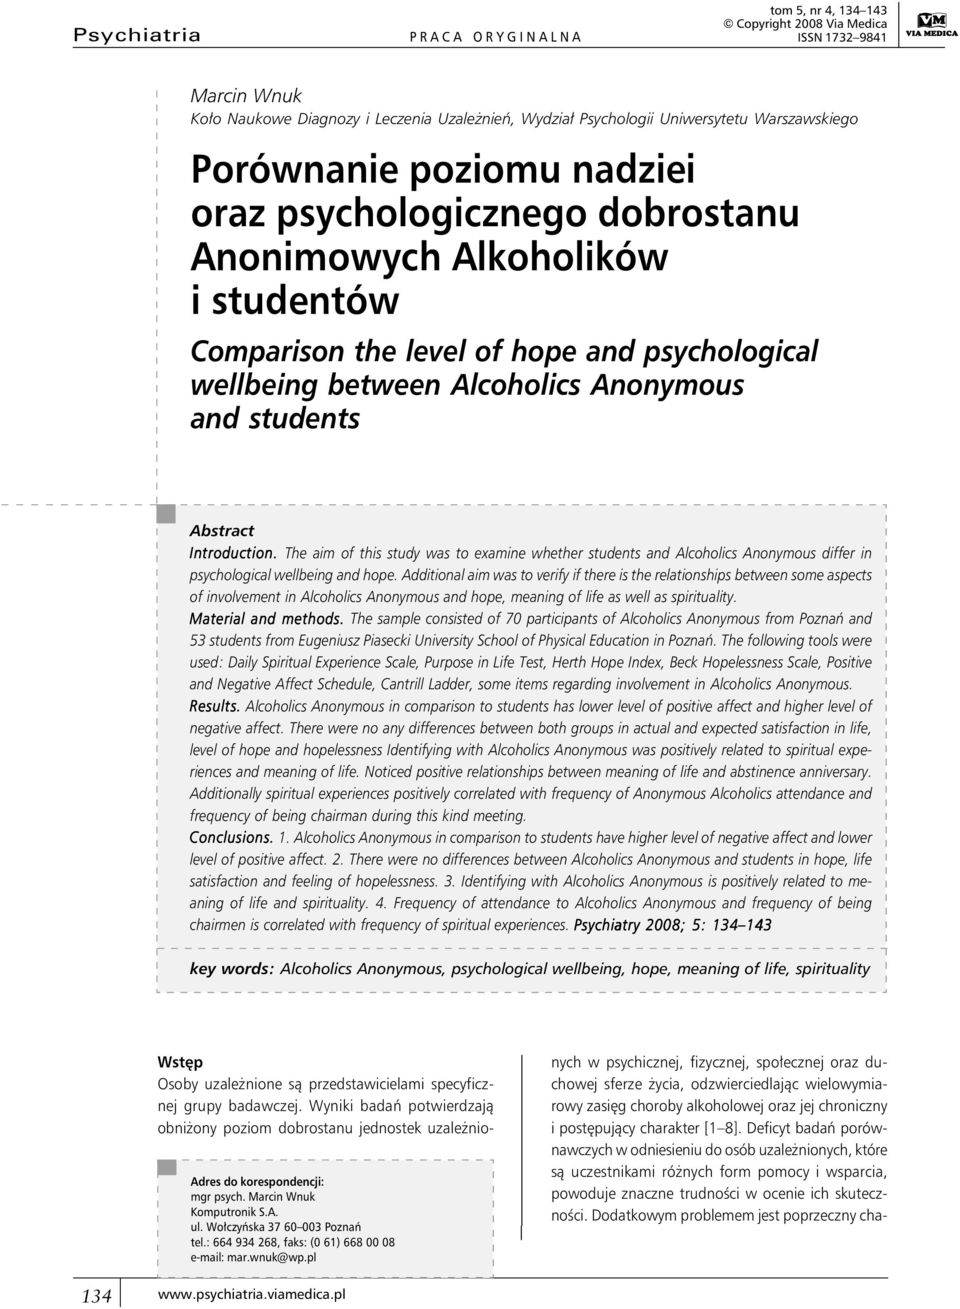 Abstract Introduction. The aim of this study was to examine whether students and Alcoholics Anonymous differ in psychological wellbeing and hope.